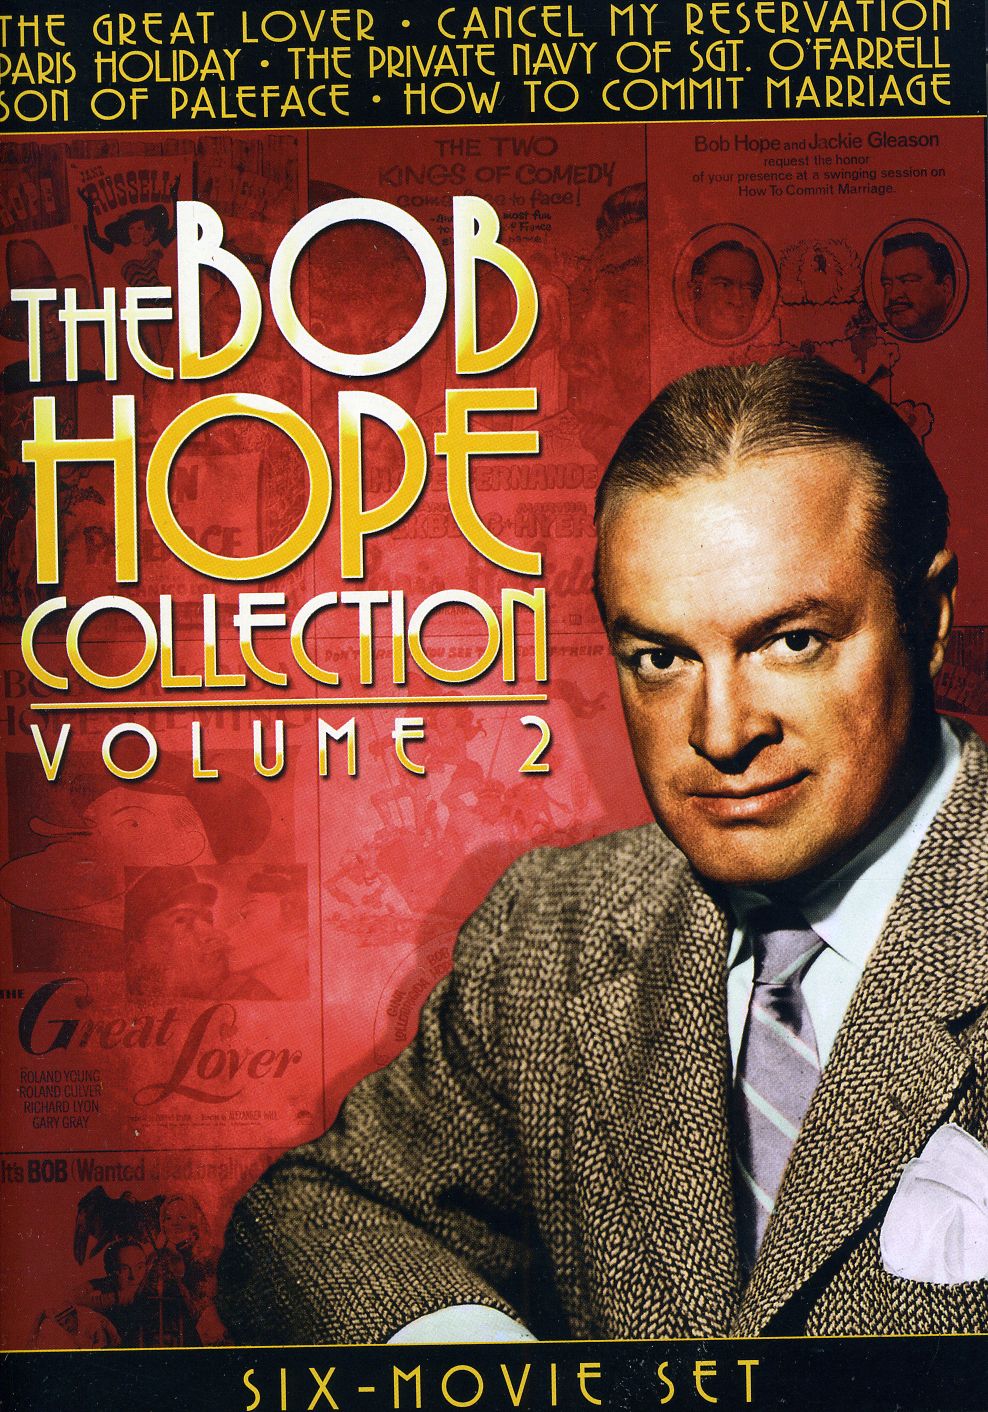 BOB HOPE COLLECTION 2 (3PC) / (FULL)